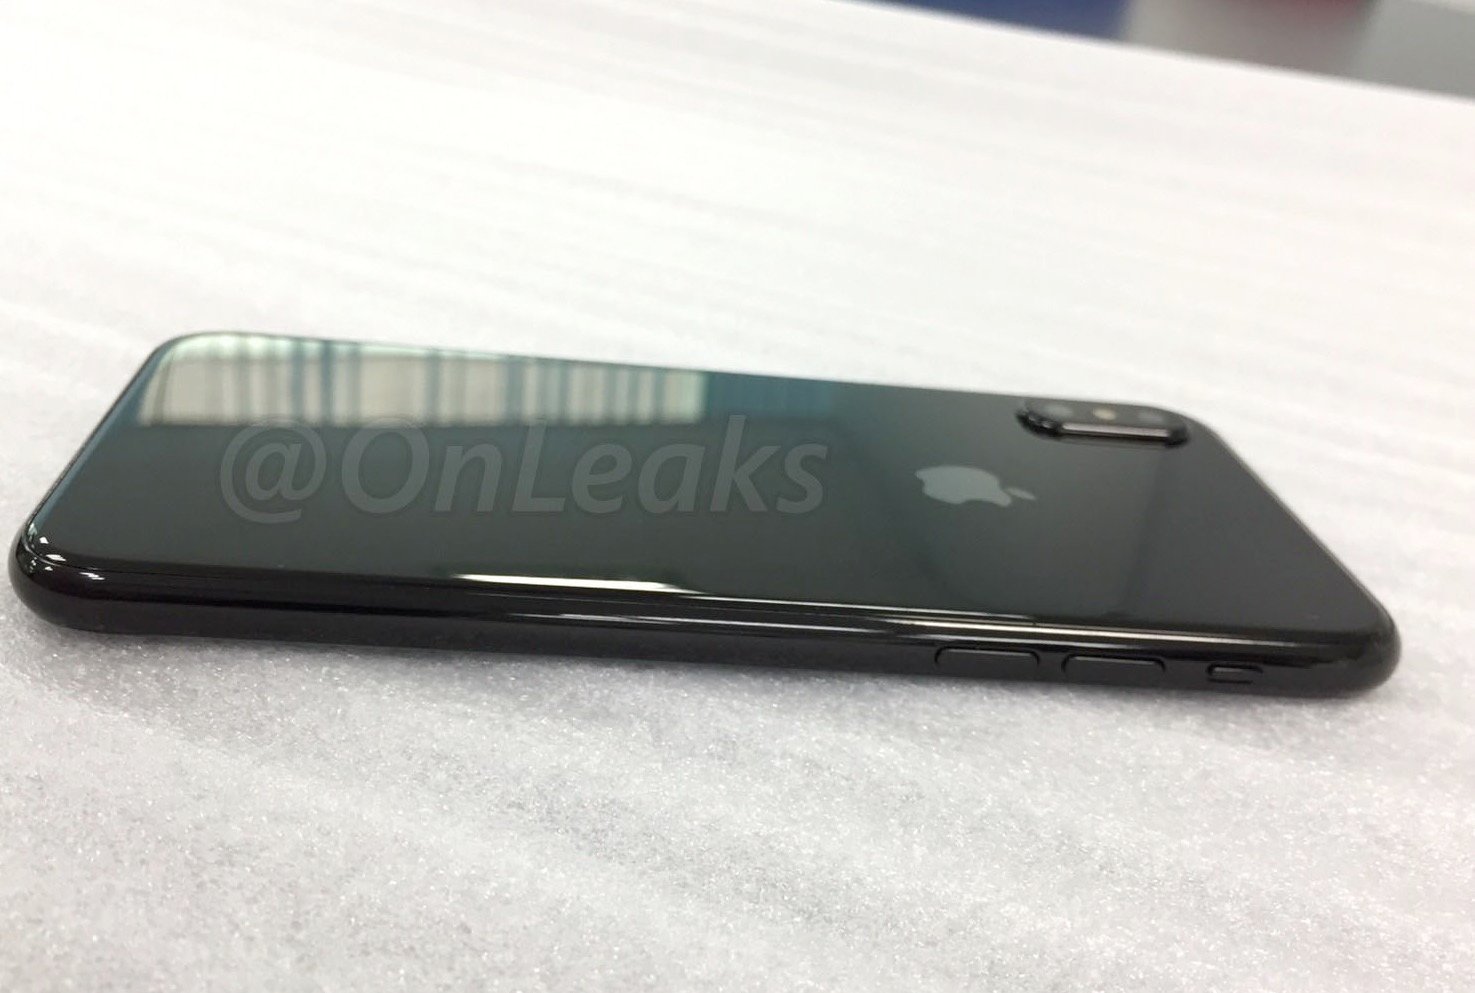 A glass back with a new camera design on an iPhone 8 dummy unit.